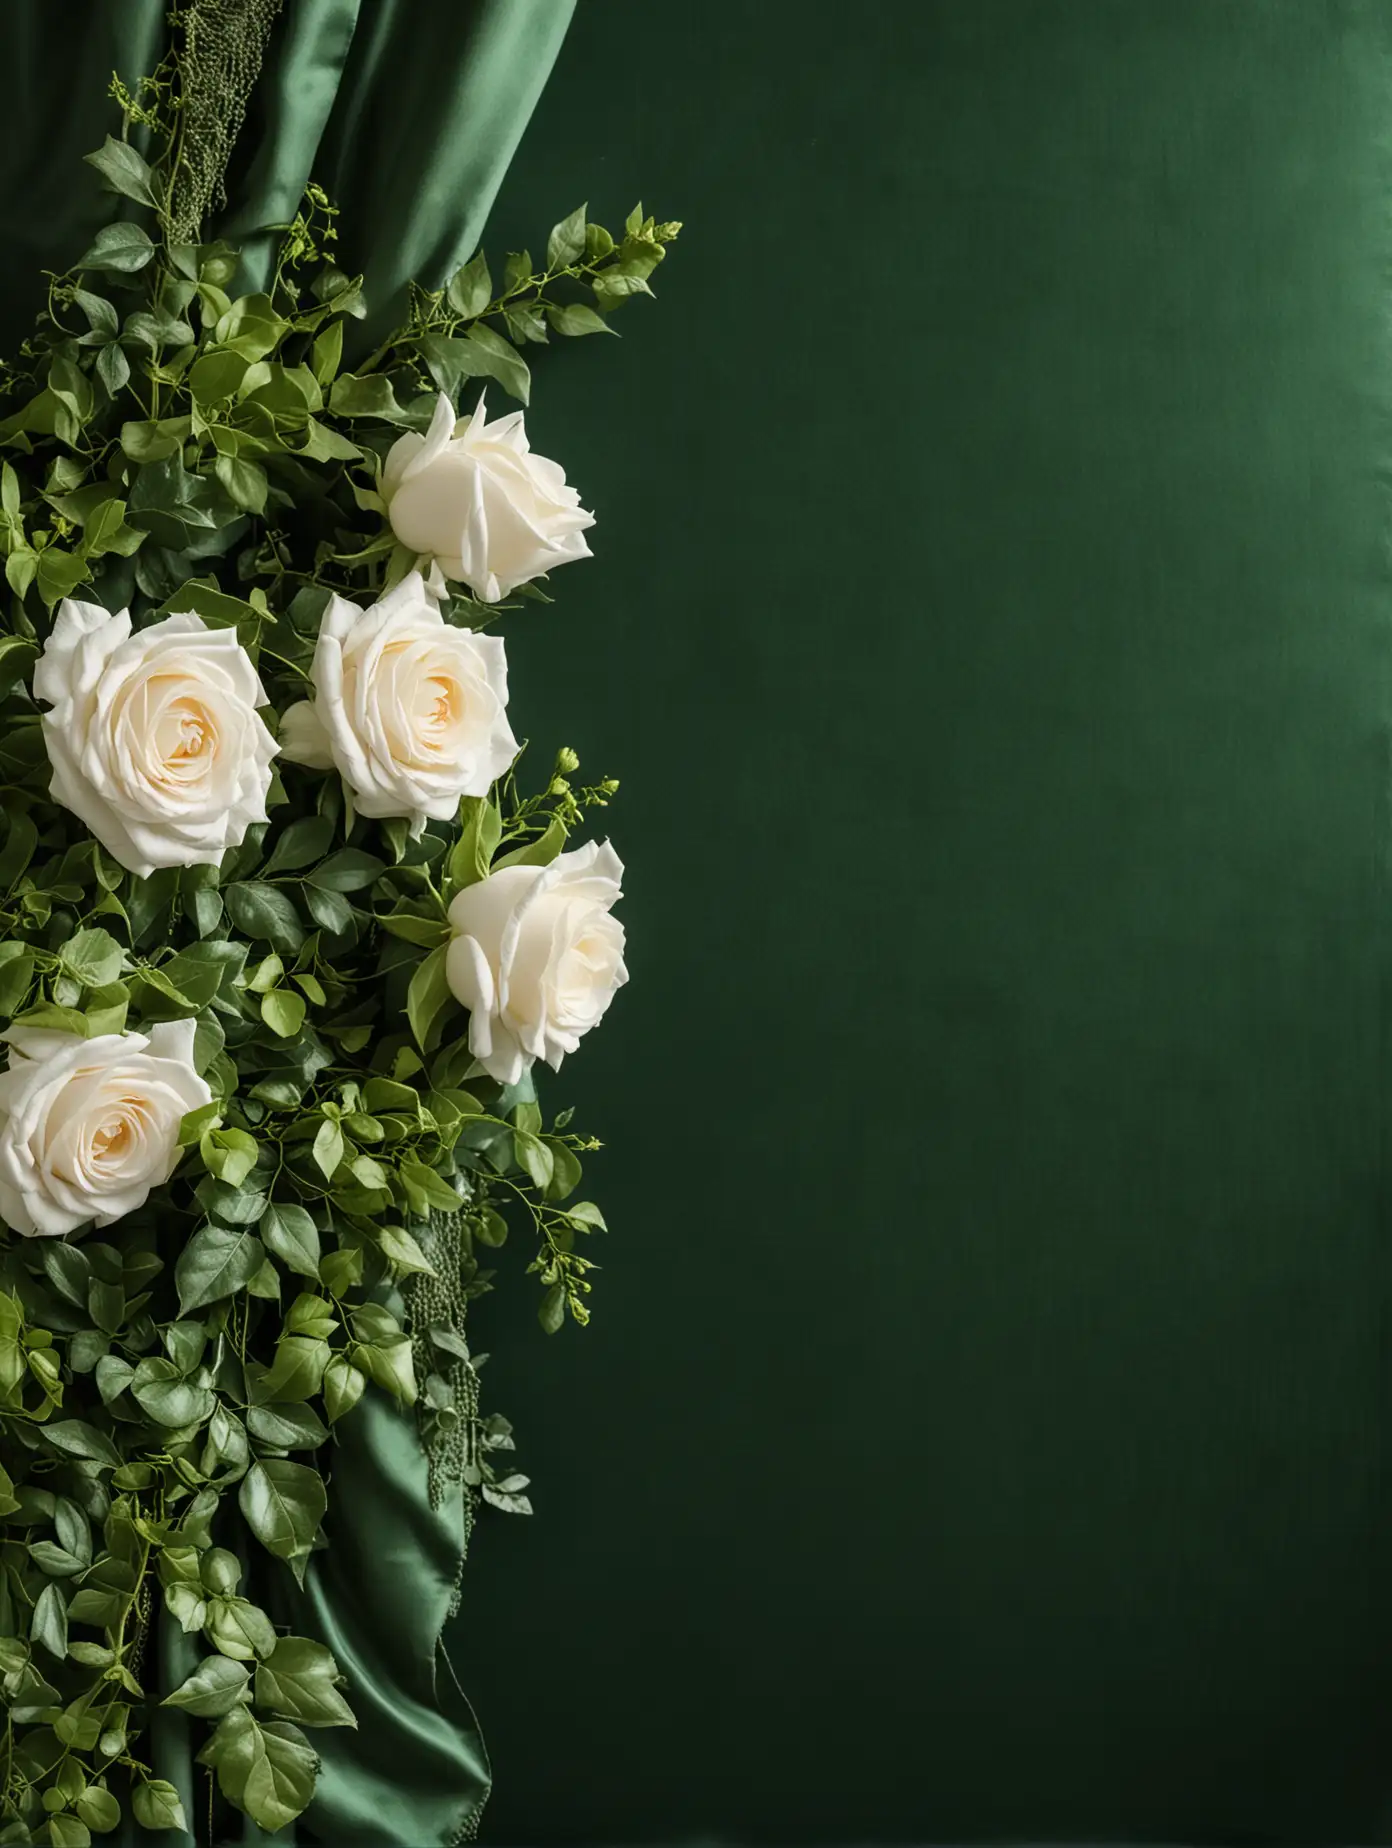 Elegant White Roses and Ivy on Draped Green Fabric